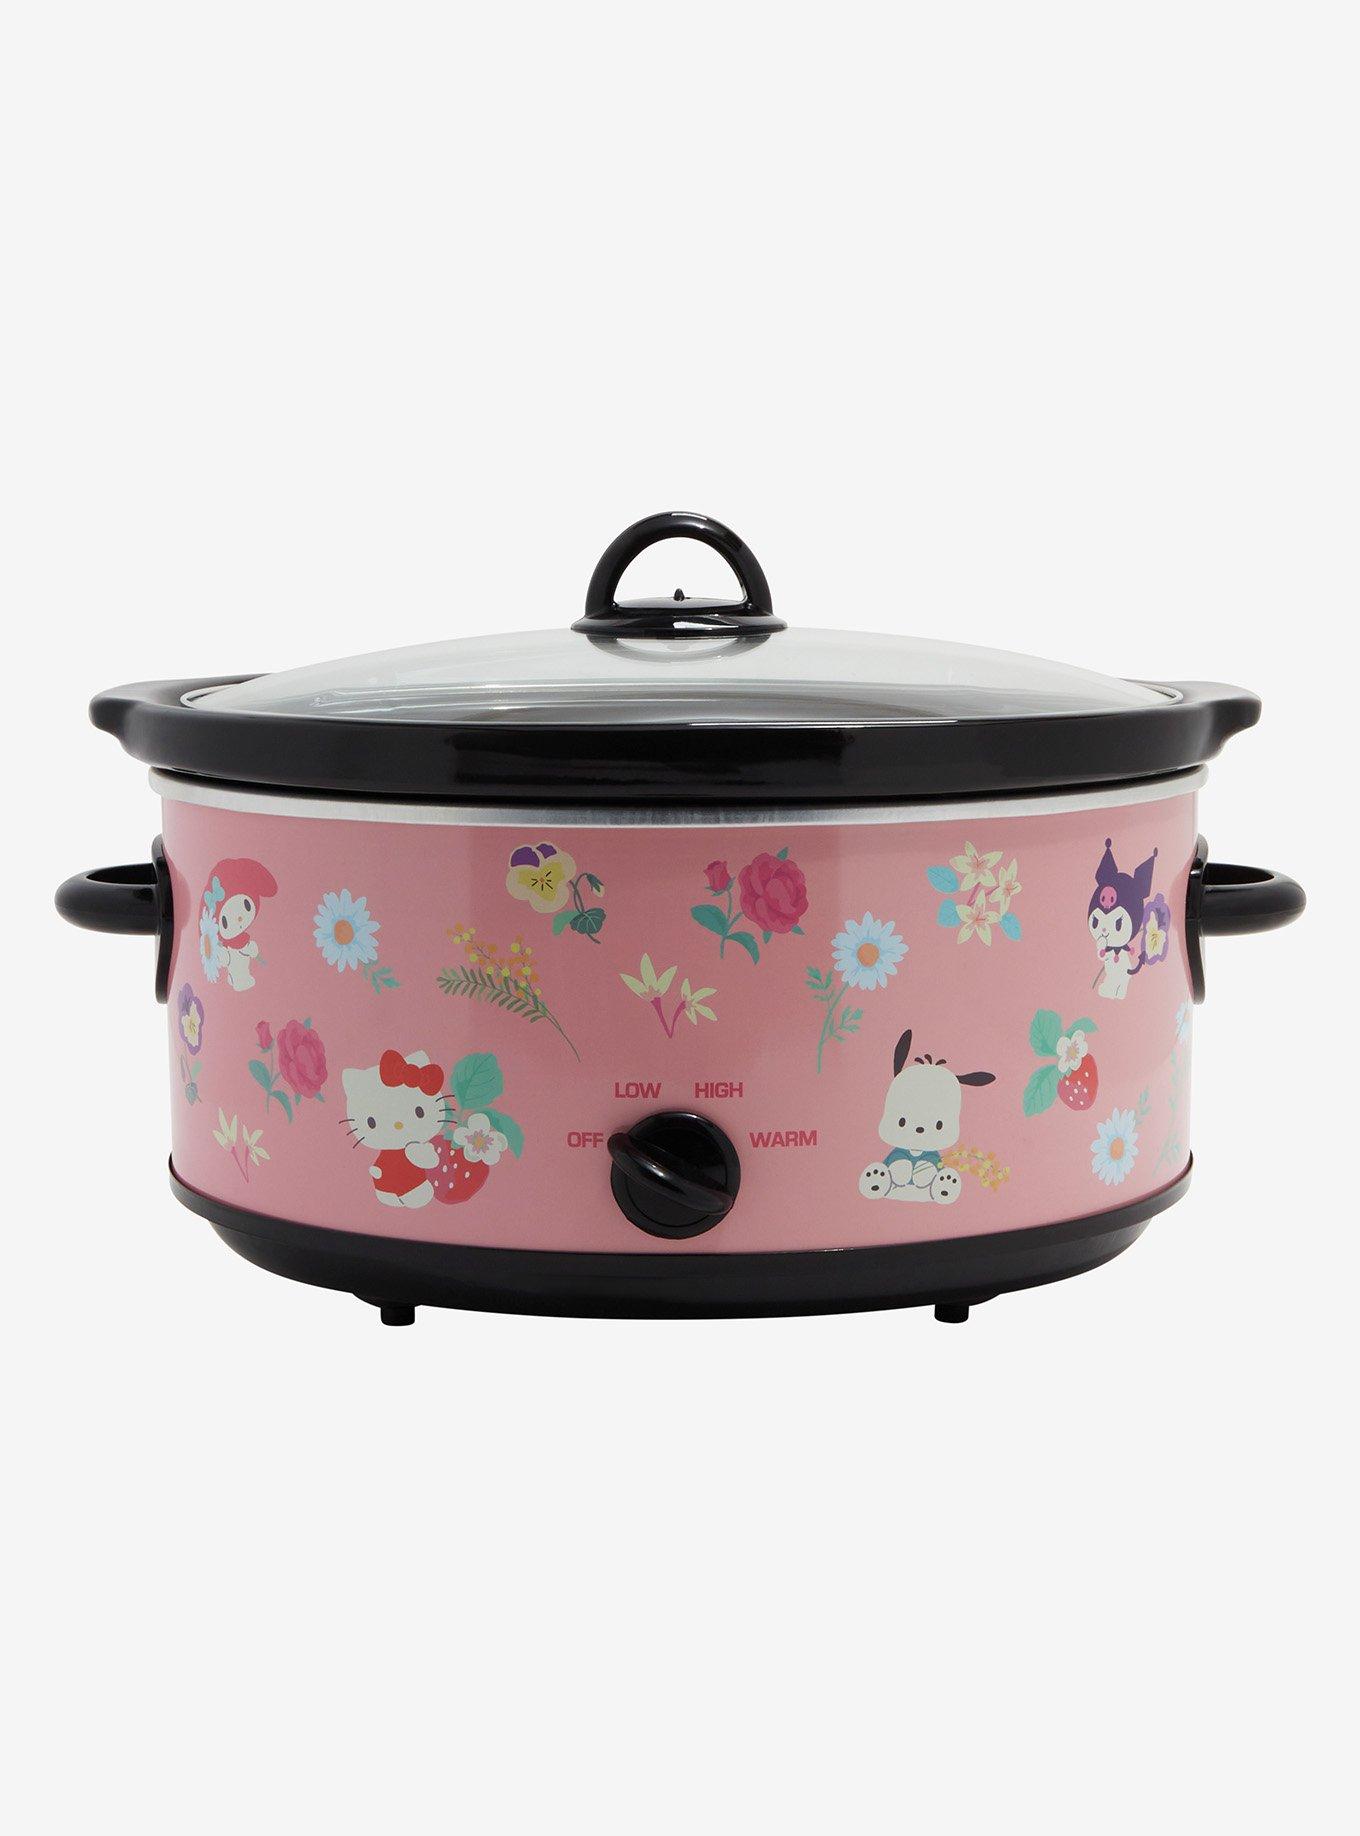 Hello Kitty 15-Cup 316 Pot-Style Rice Cooker & Food Steamer Slow Cooker  Crock Pot Pink Inspired by You.